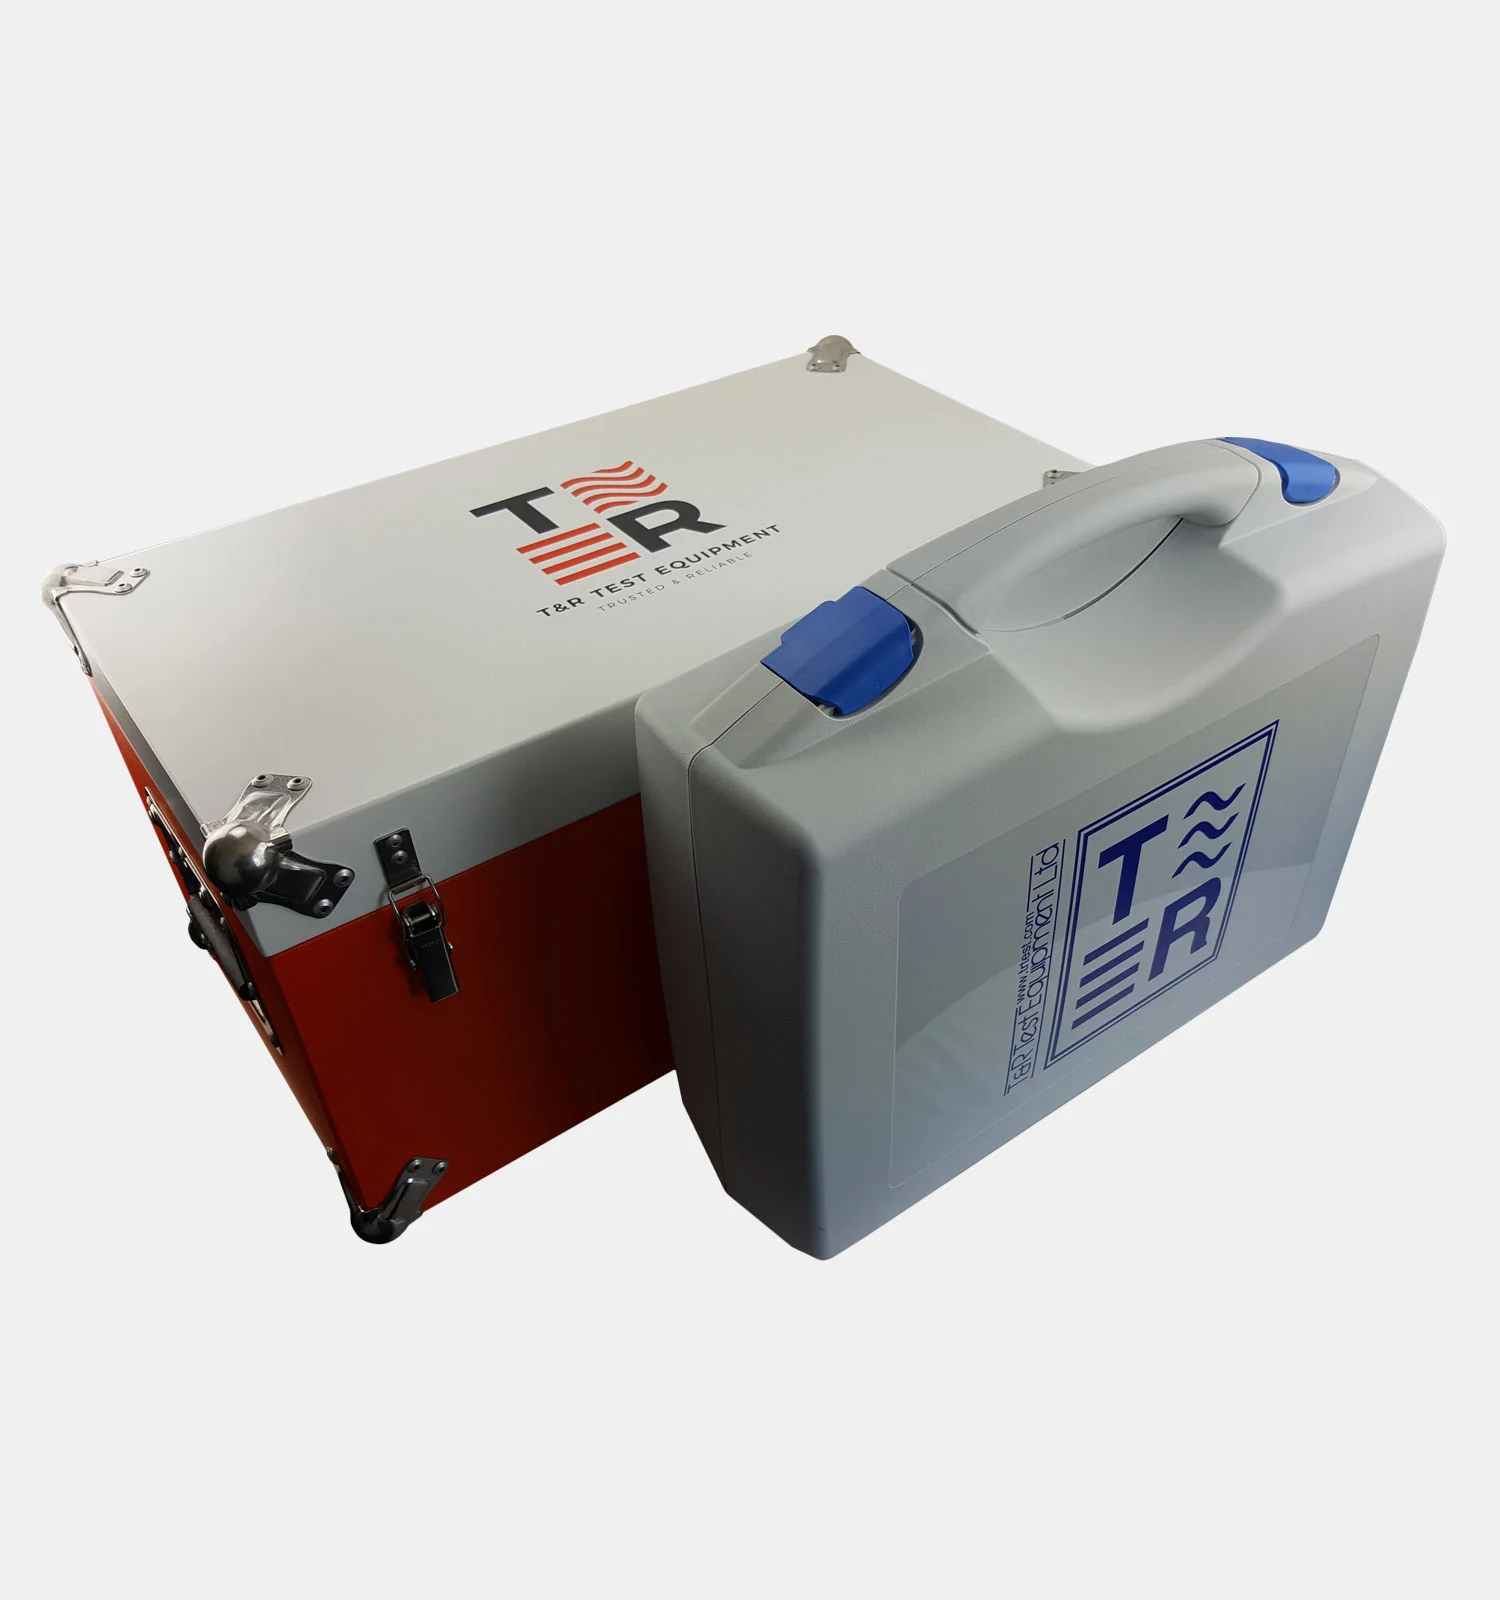 UK Suppliers of 200A-3PH MK3 Secondary Current Injection Test Set